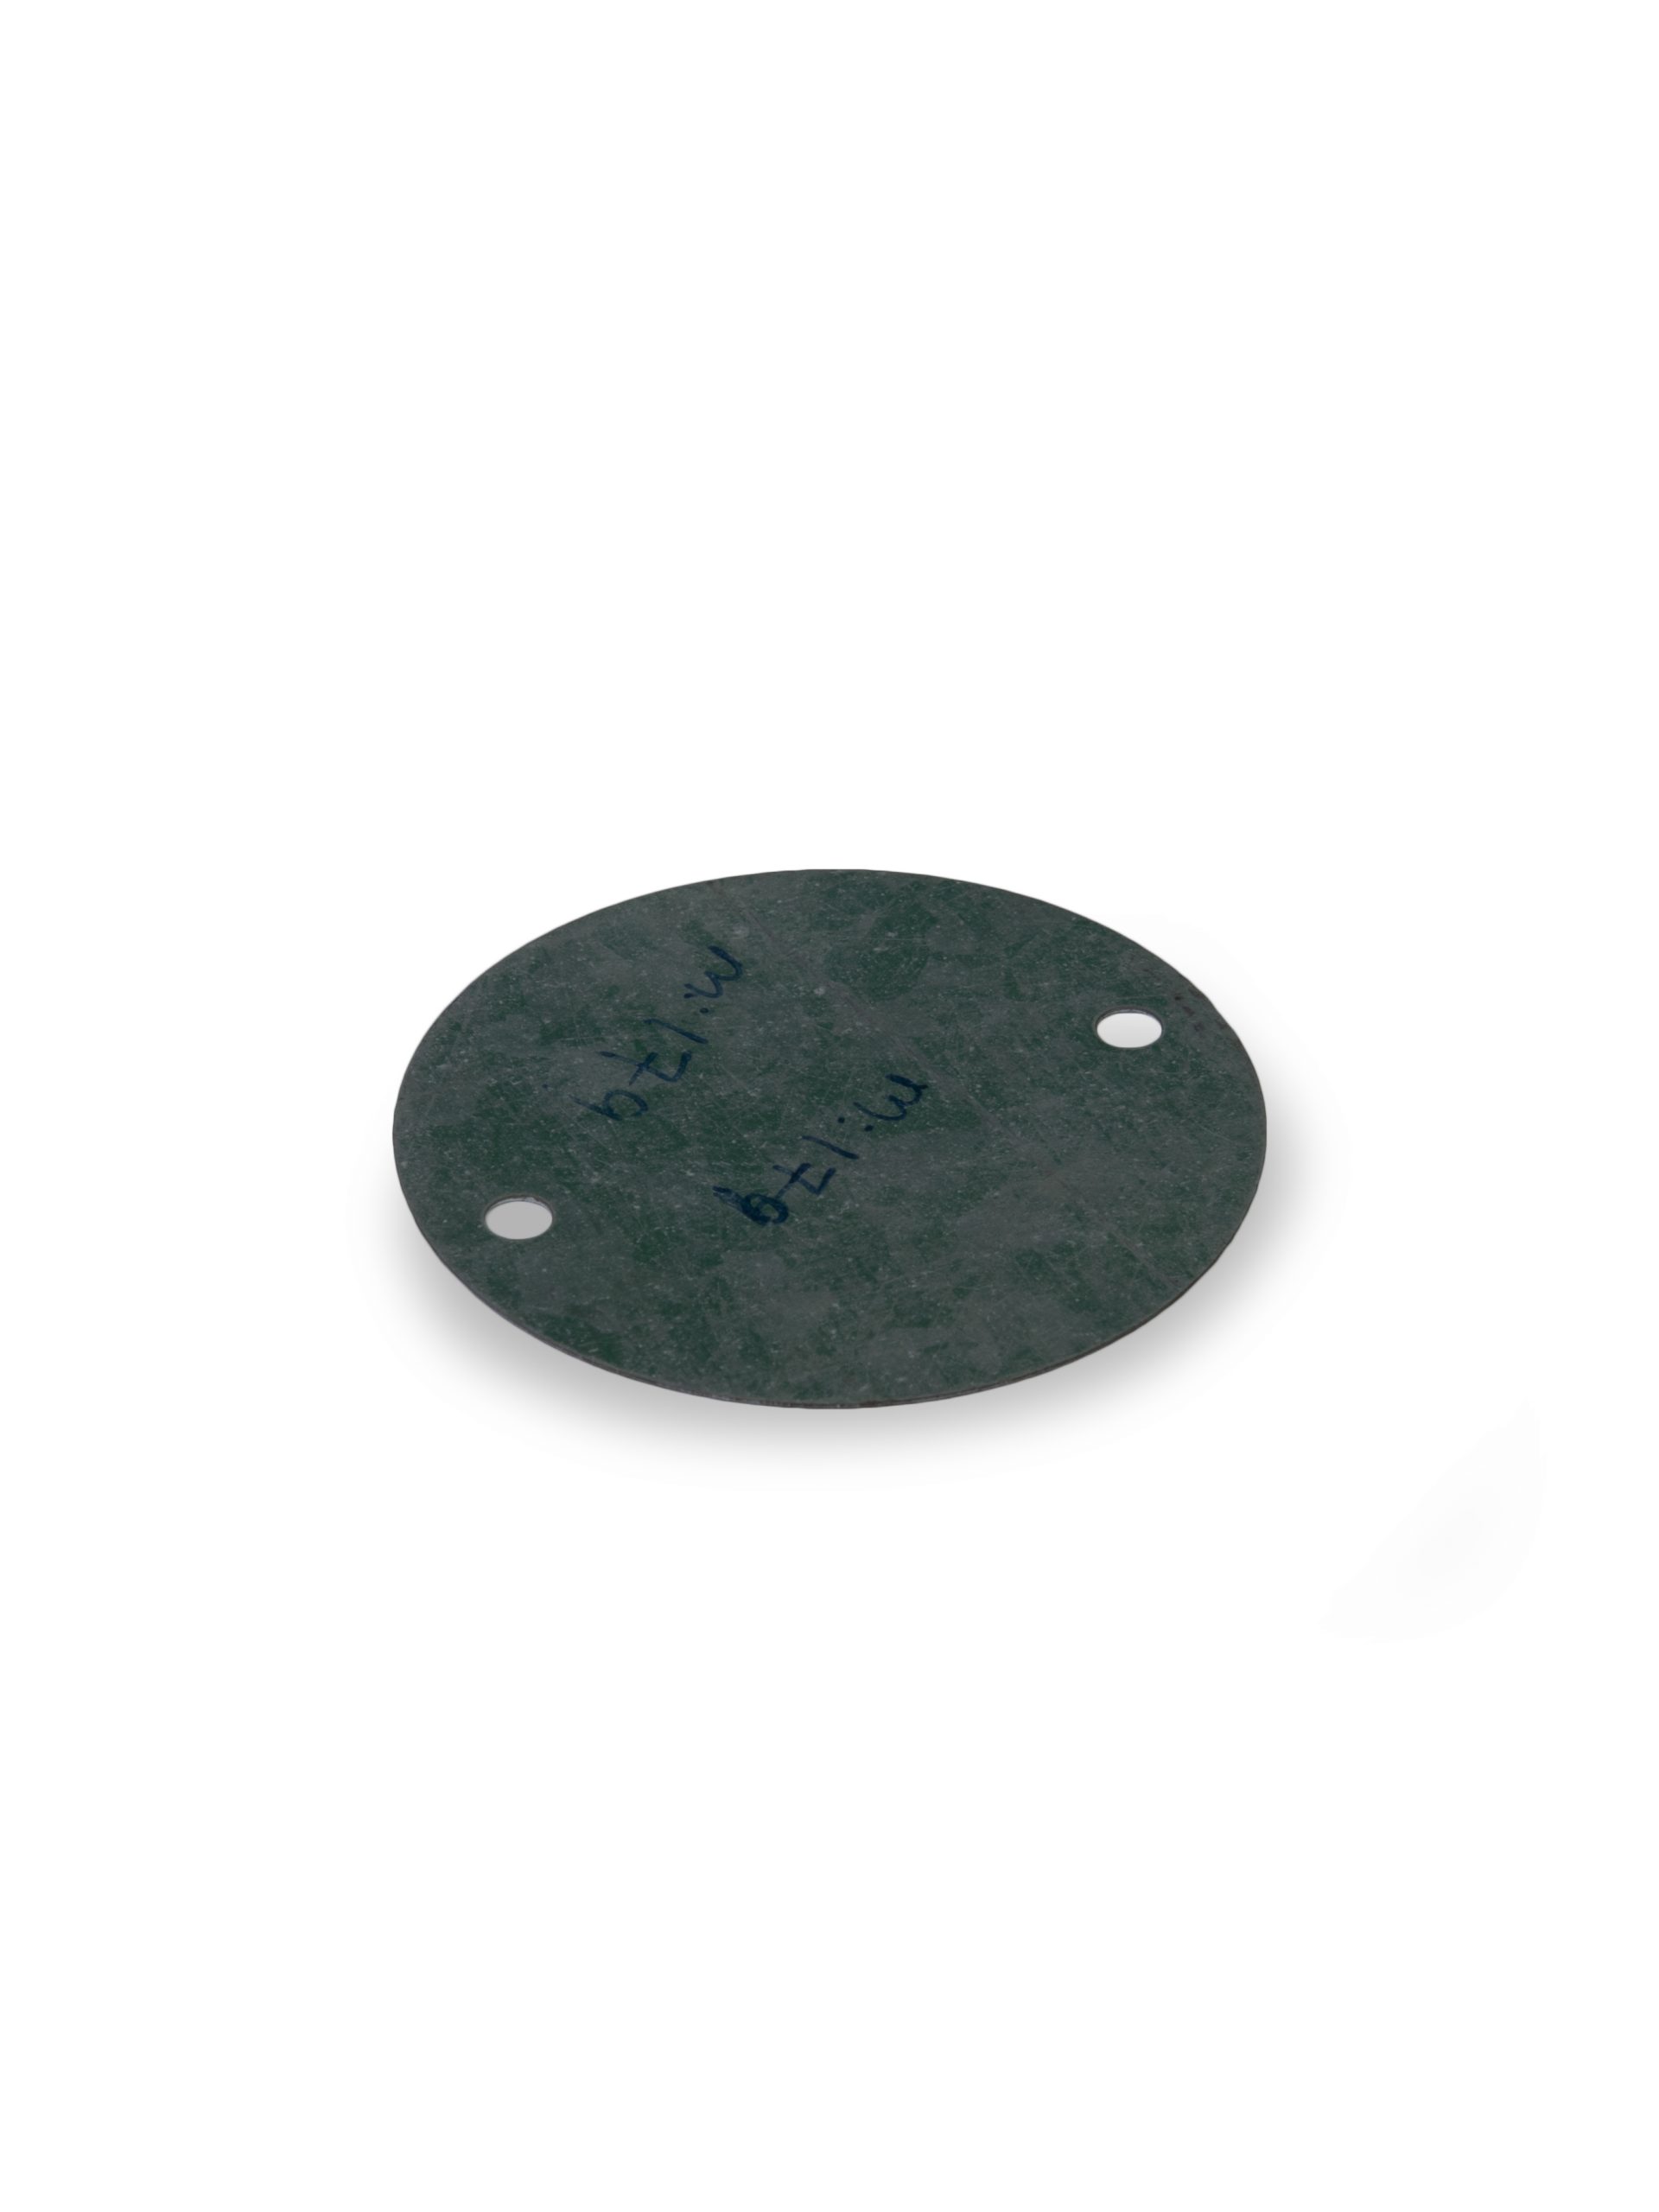 GI ROUND LID COVER 66MM